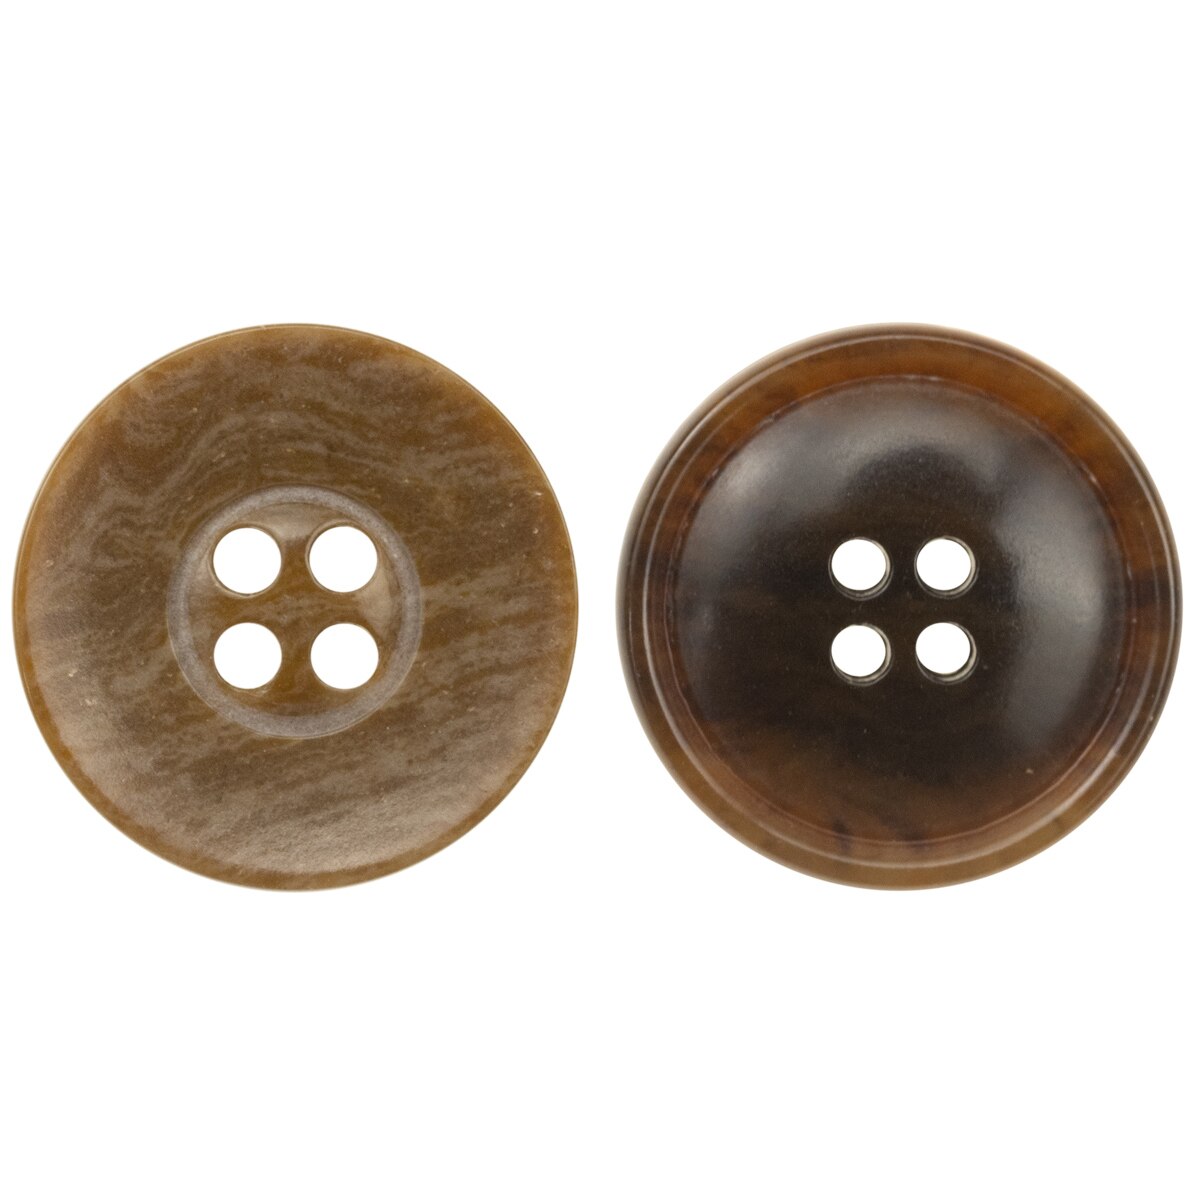 Wood Imitation Urea Buttons for Casual Clothing High Quality Shiny Buttons 15mm/20mm